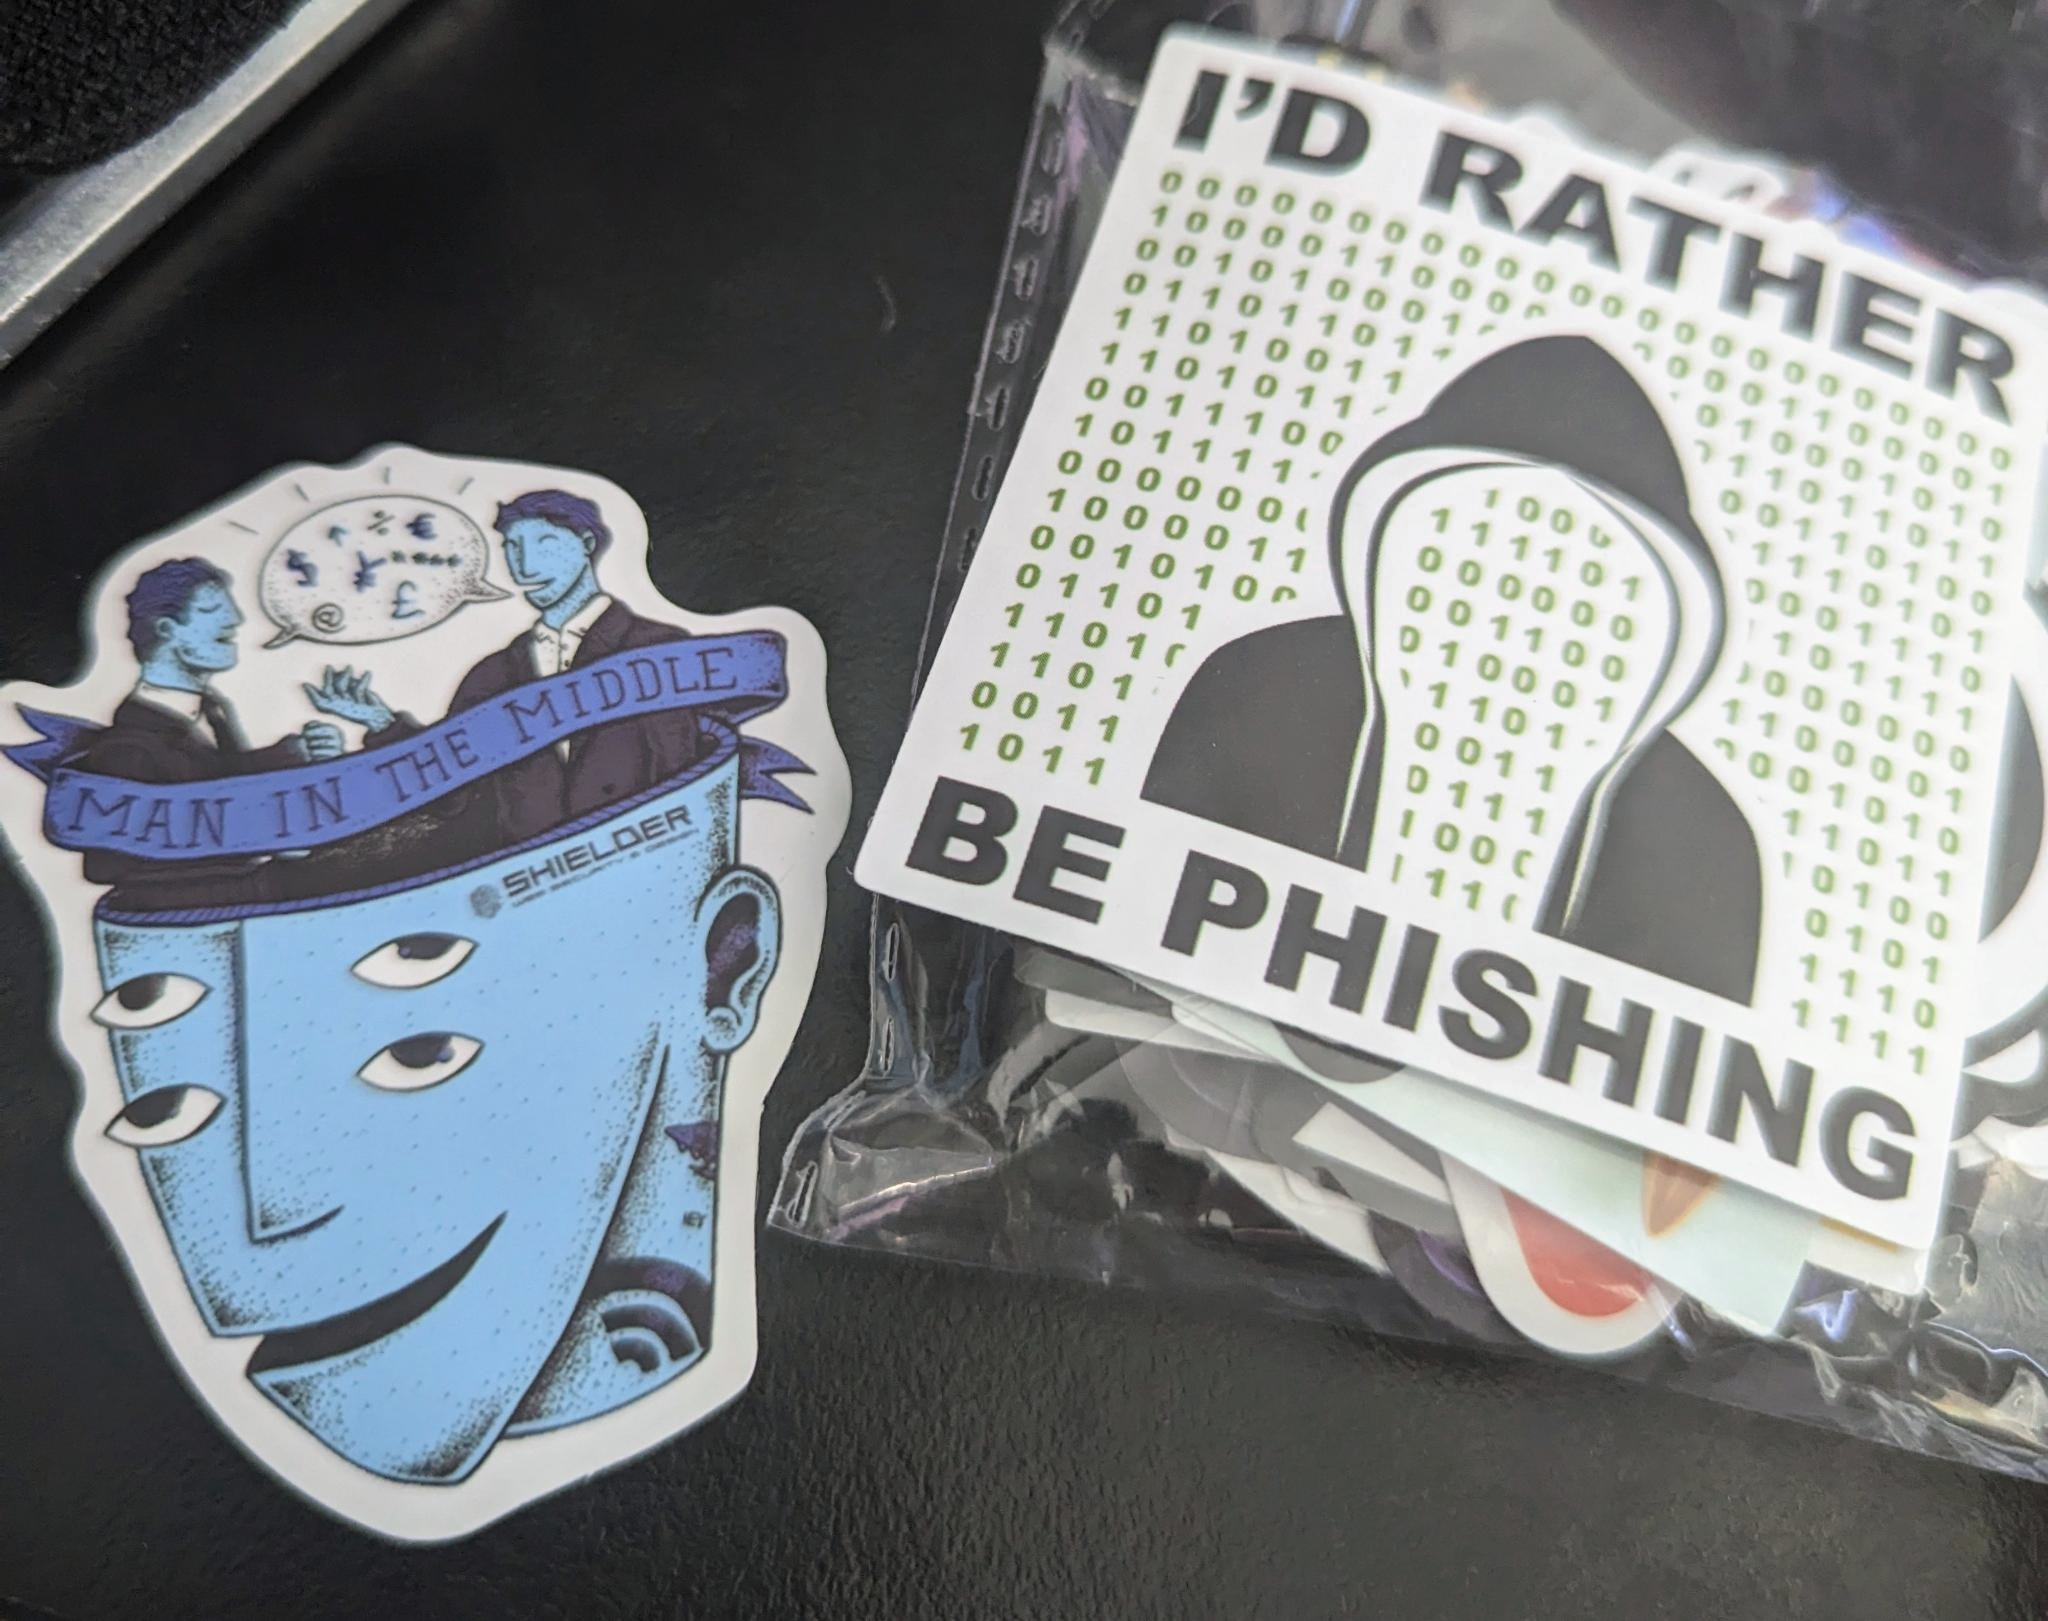 Hacker Stickers. One showing a man in the middle attack depicted with two people conversing inside of a larger third persons head. The second sticker has binary and a hoodie outline with the words &ldquo;I&rsquo;d rather be phishing&rdquo;